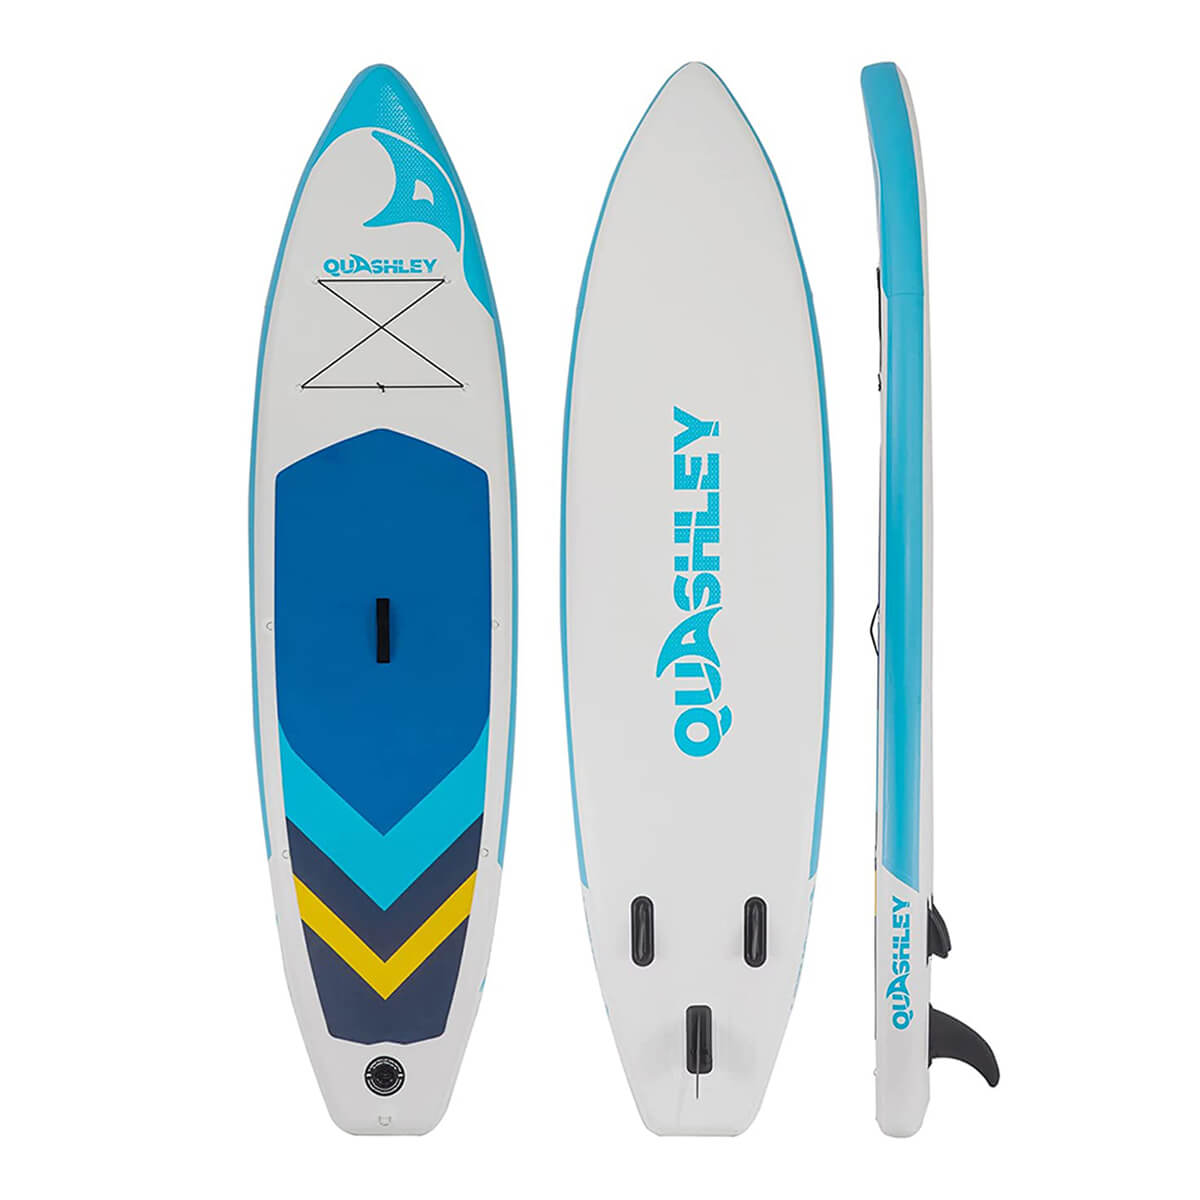 Quashley Inflatable Stand Up Accessories Board with SUP Paddle Premium Surfboard